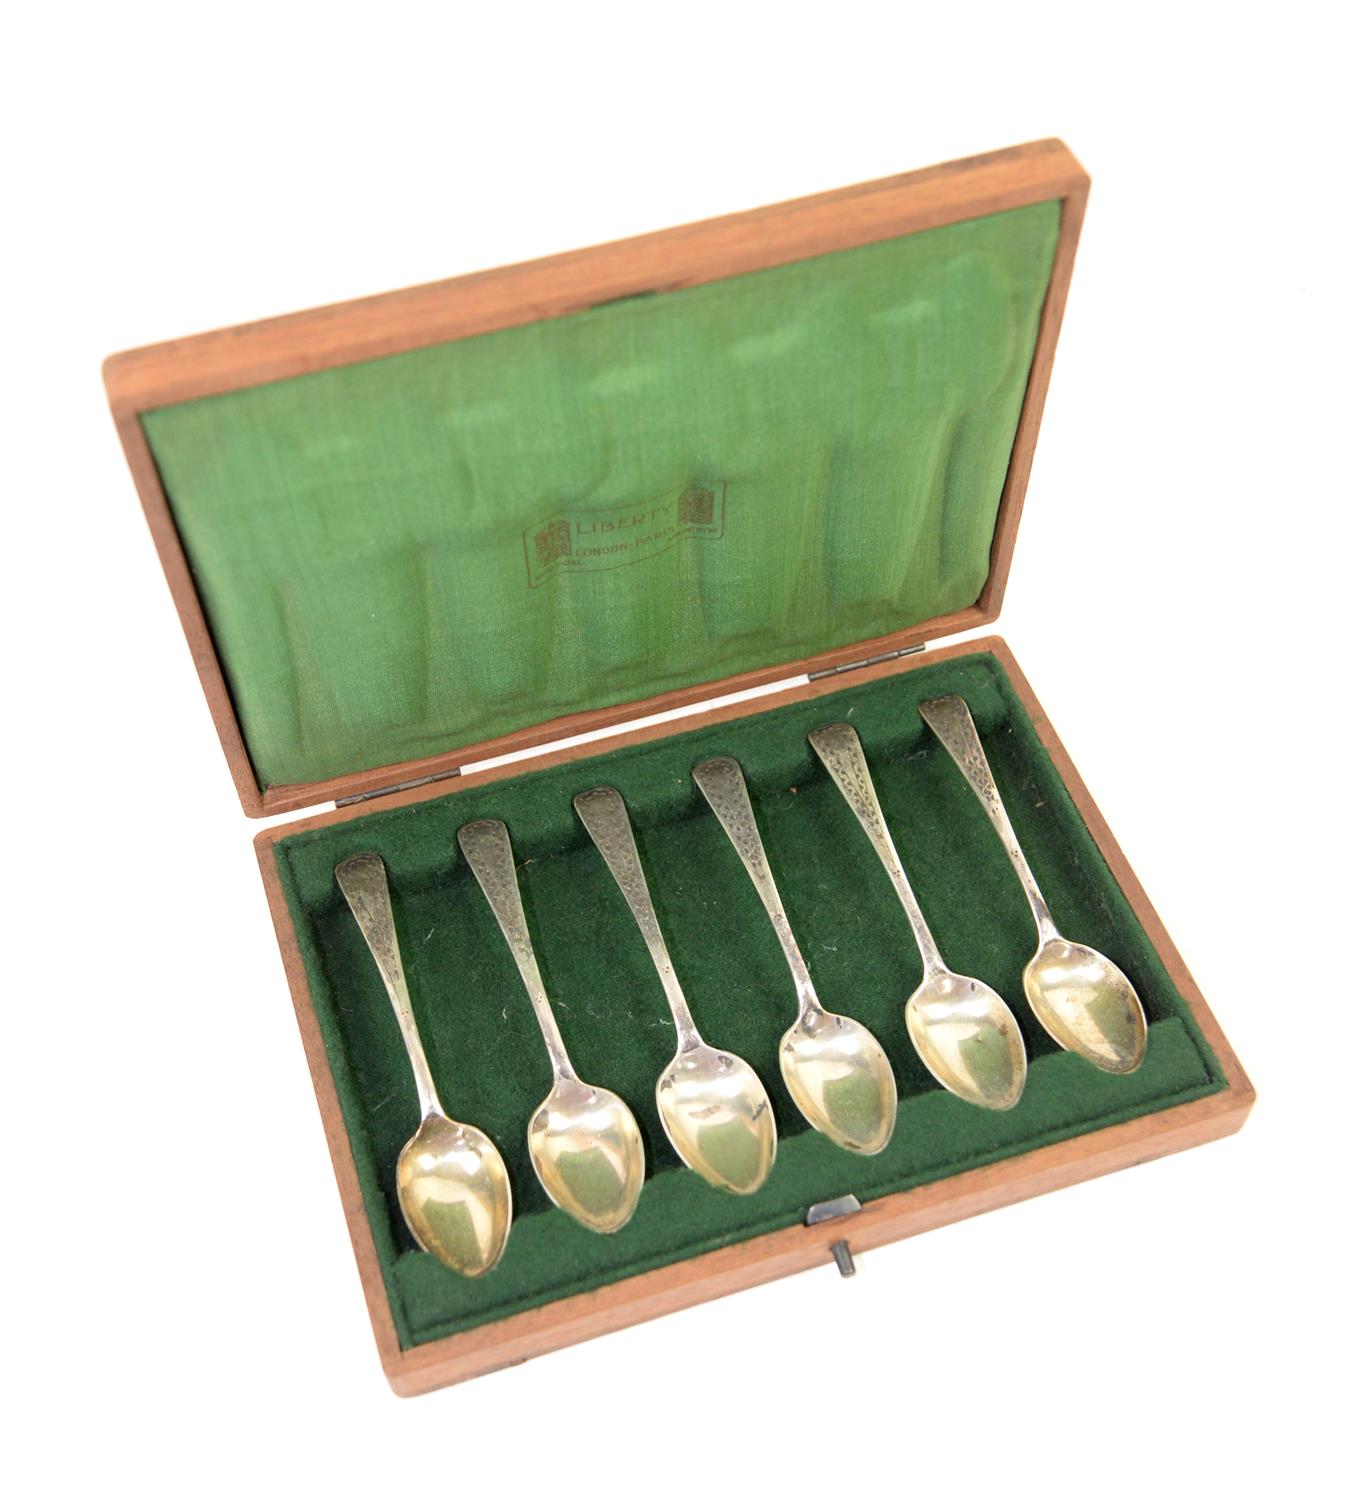 Liberty set of six silver teaspoons, hallmarked, in wooden case lined with green silk which is